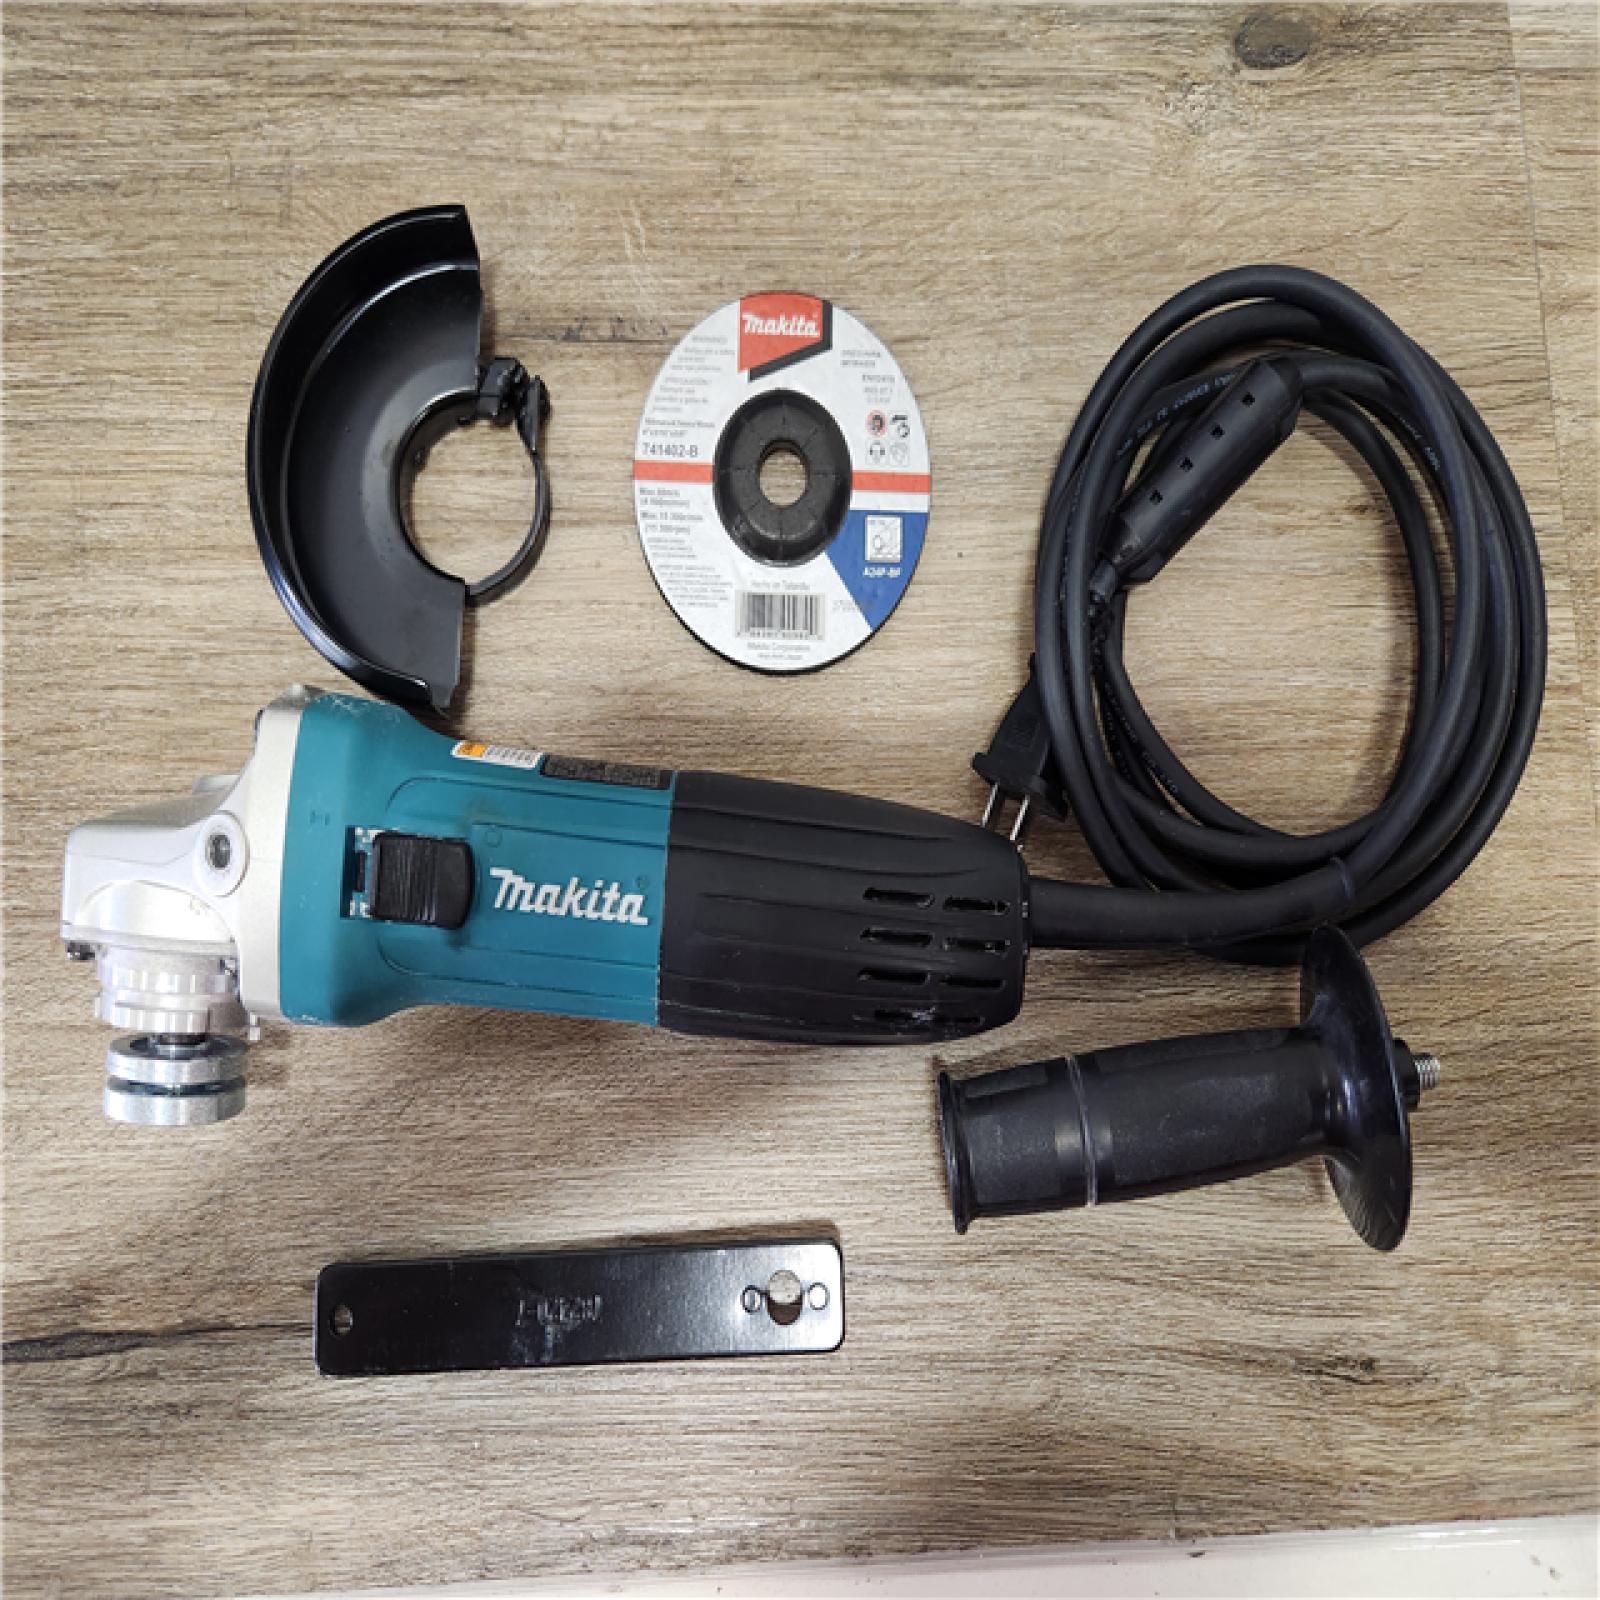 Phoenix Location NEW Makita 6 Amp Corded 4 in. Lightweight Angle Grinder with Grinding Wheel, Wheel Guard Side Handle Hard Case